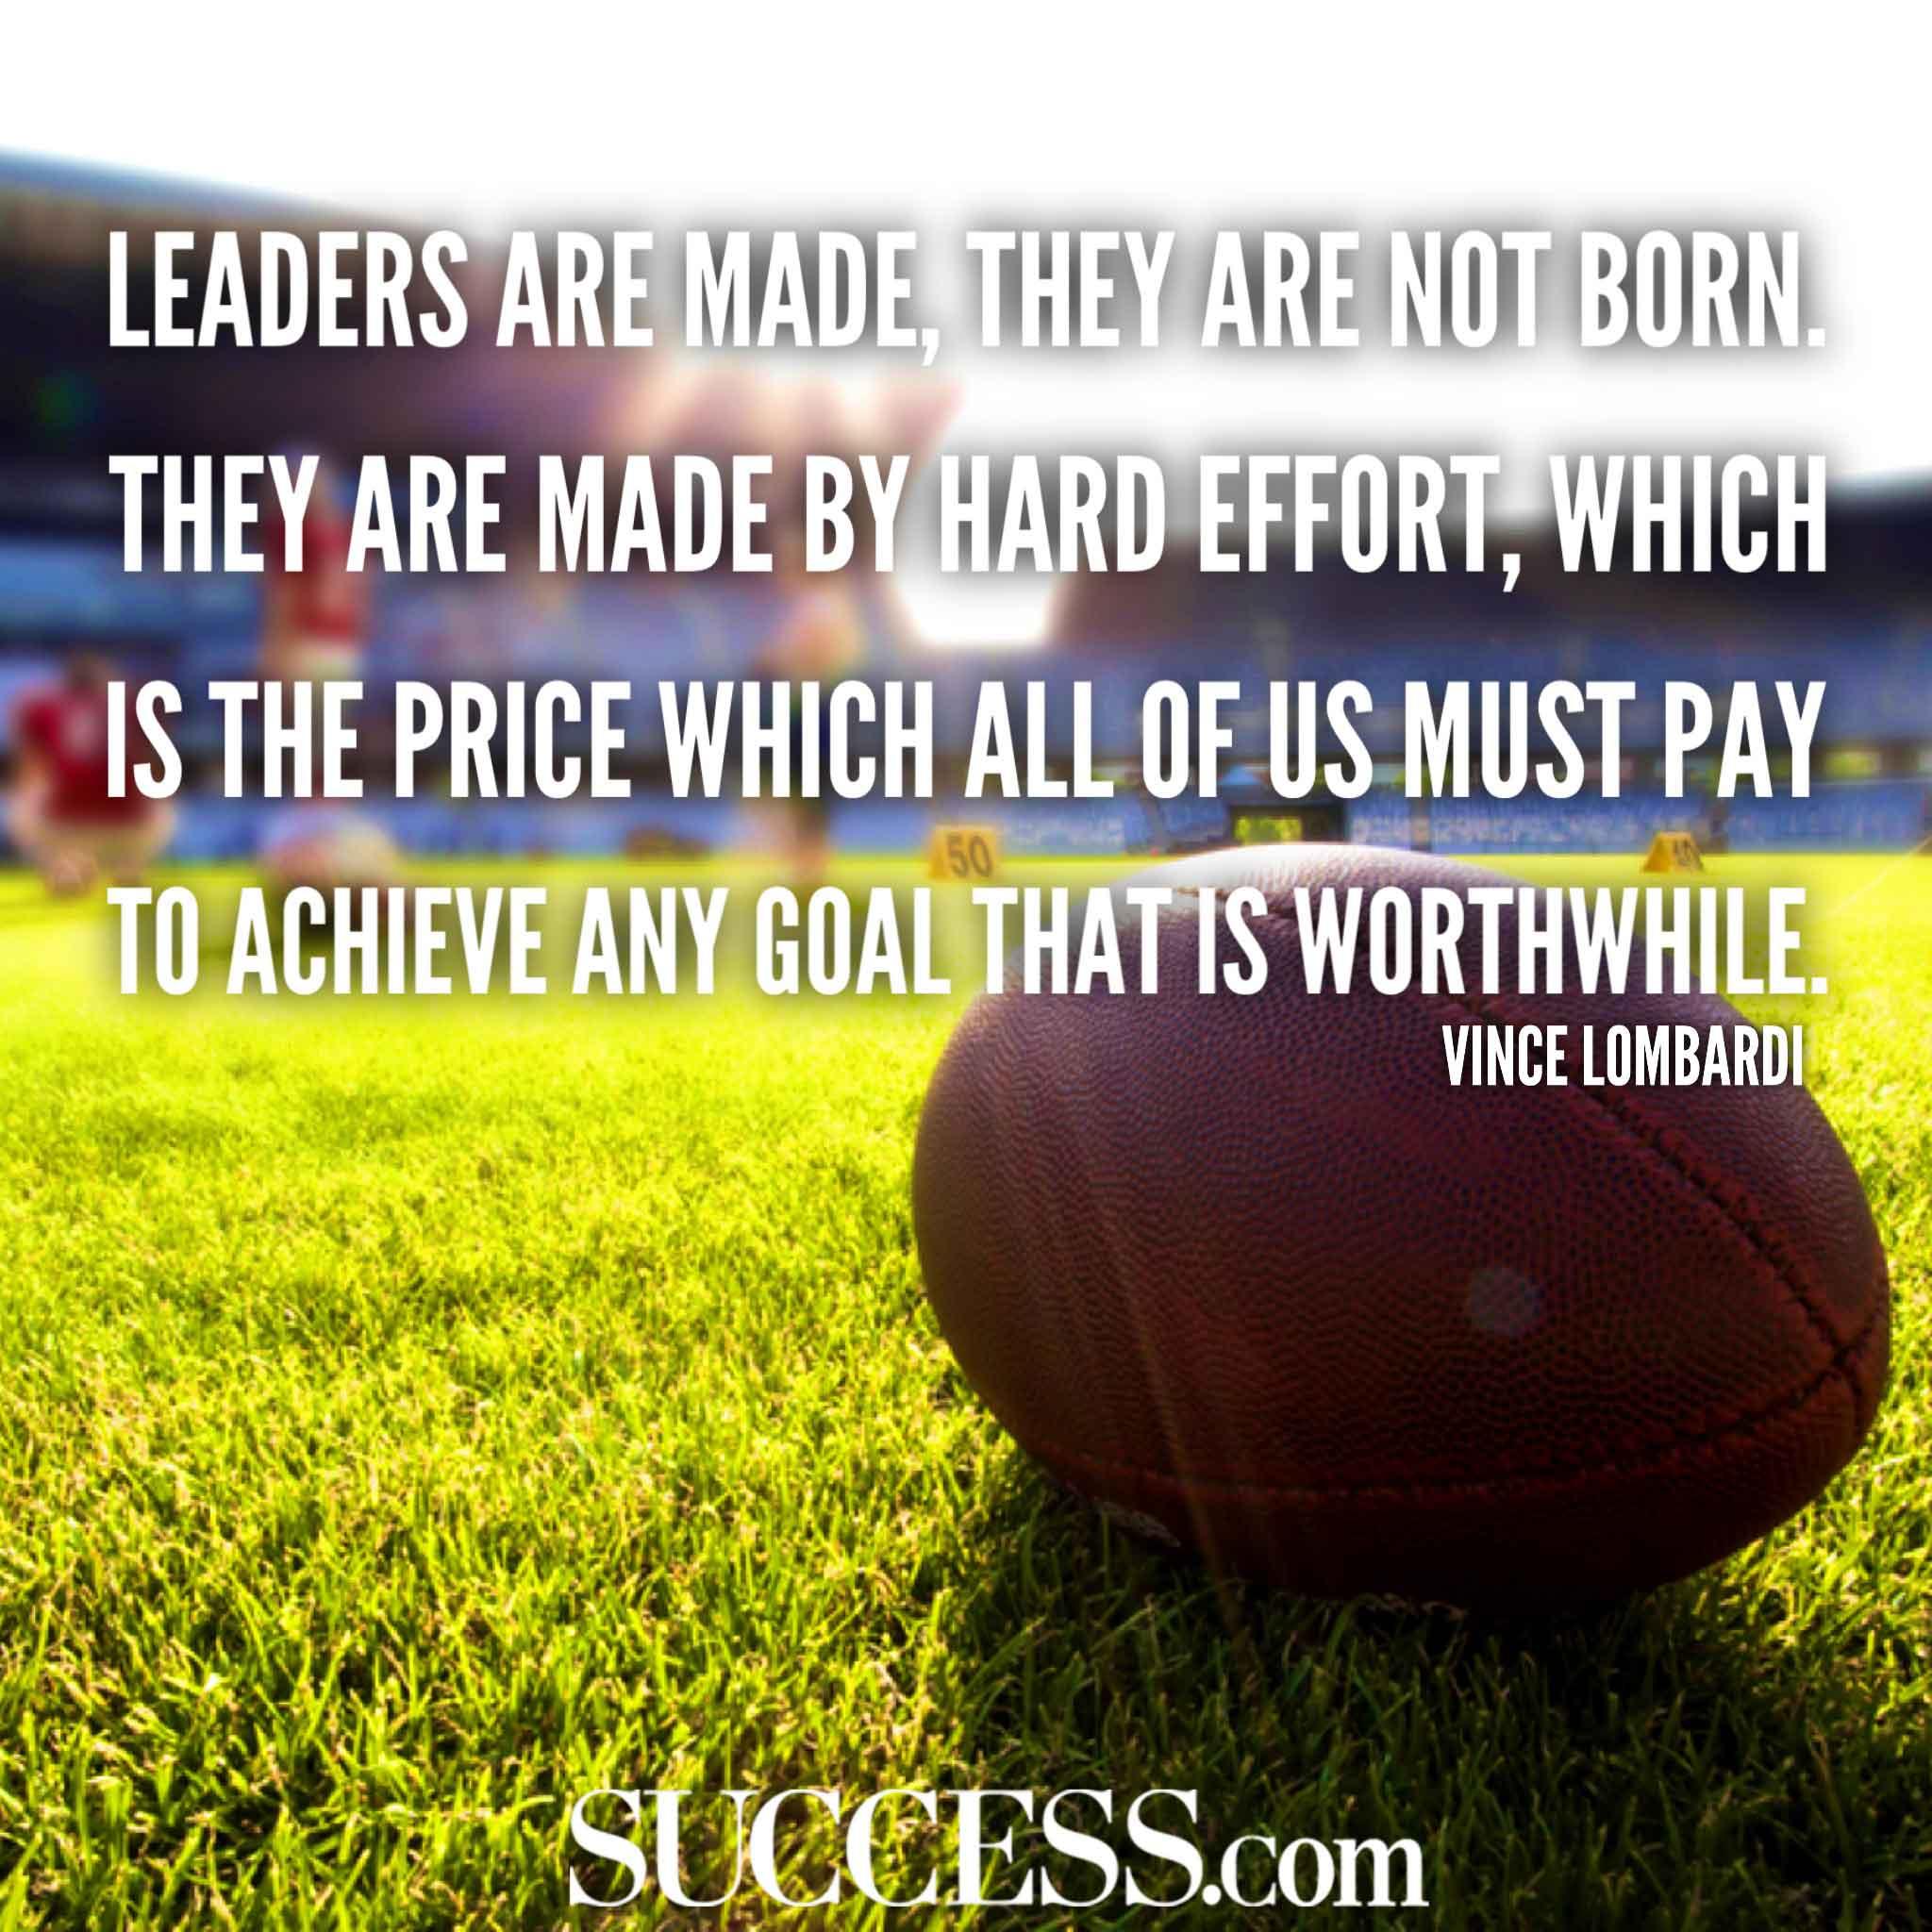 20 Motivational Quotes by the Most Inspiring NFL Coaches of All Time |  SUCCESS